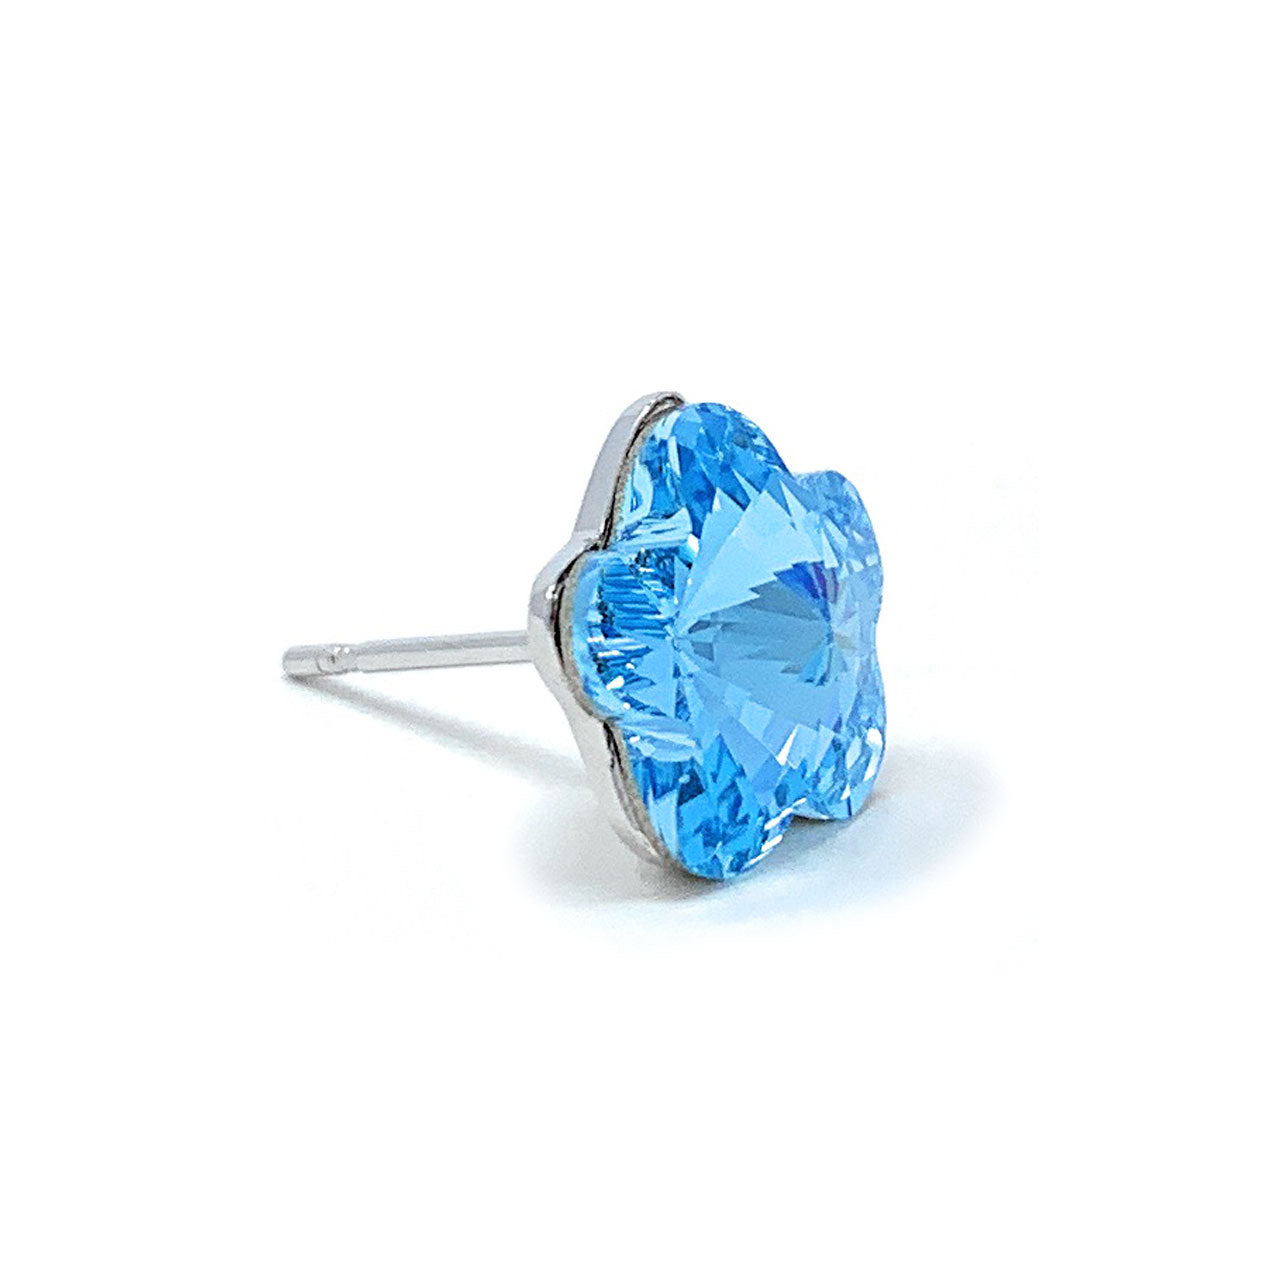 Anna Stud Earrings with Blue Aquamarine Flower Crystals from Swarovski Silver Toned Rhodium Plated - Ed Heart